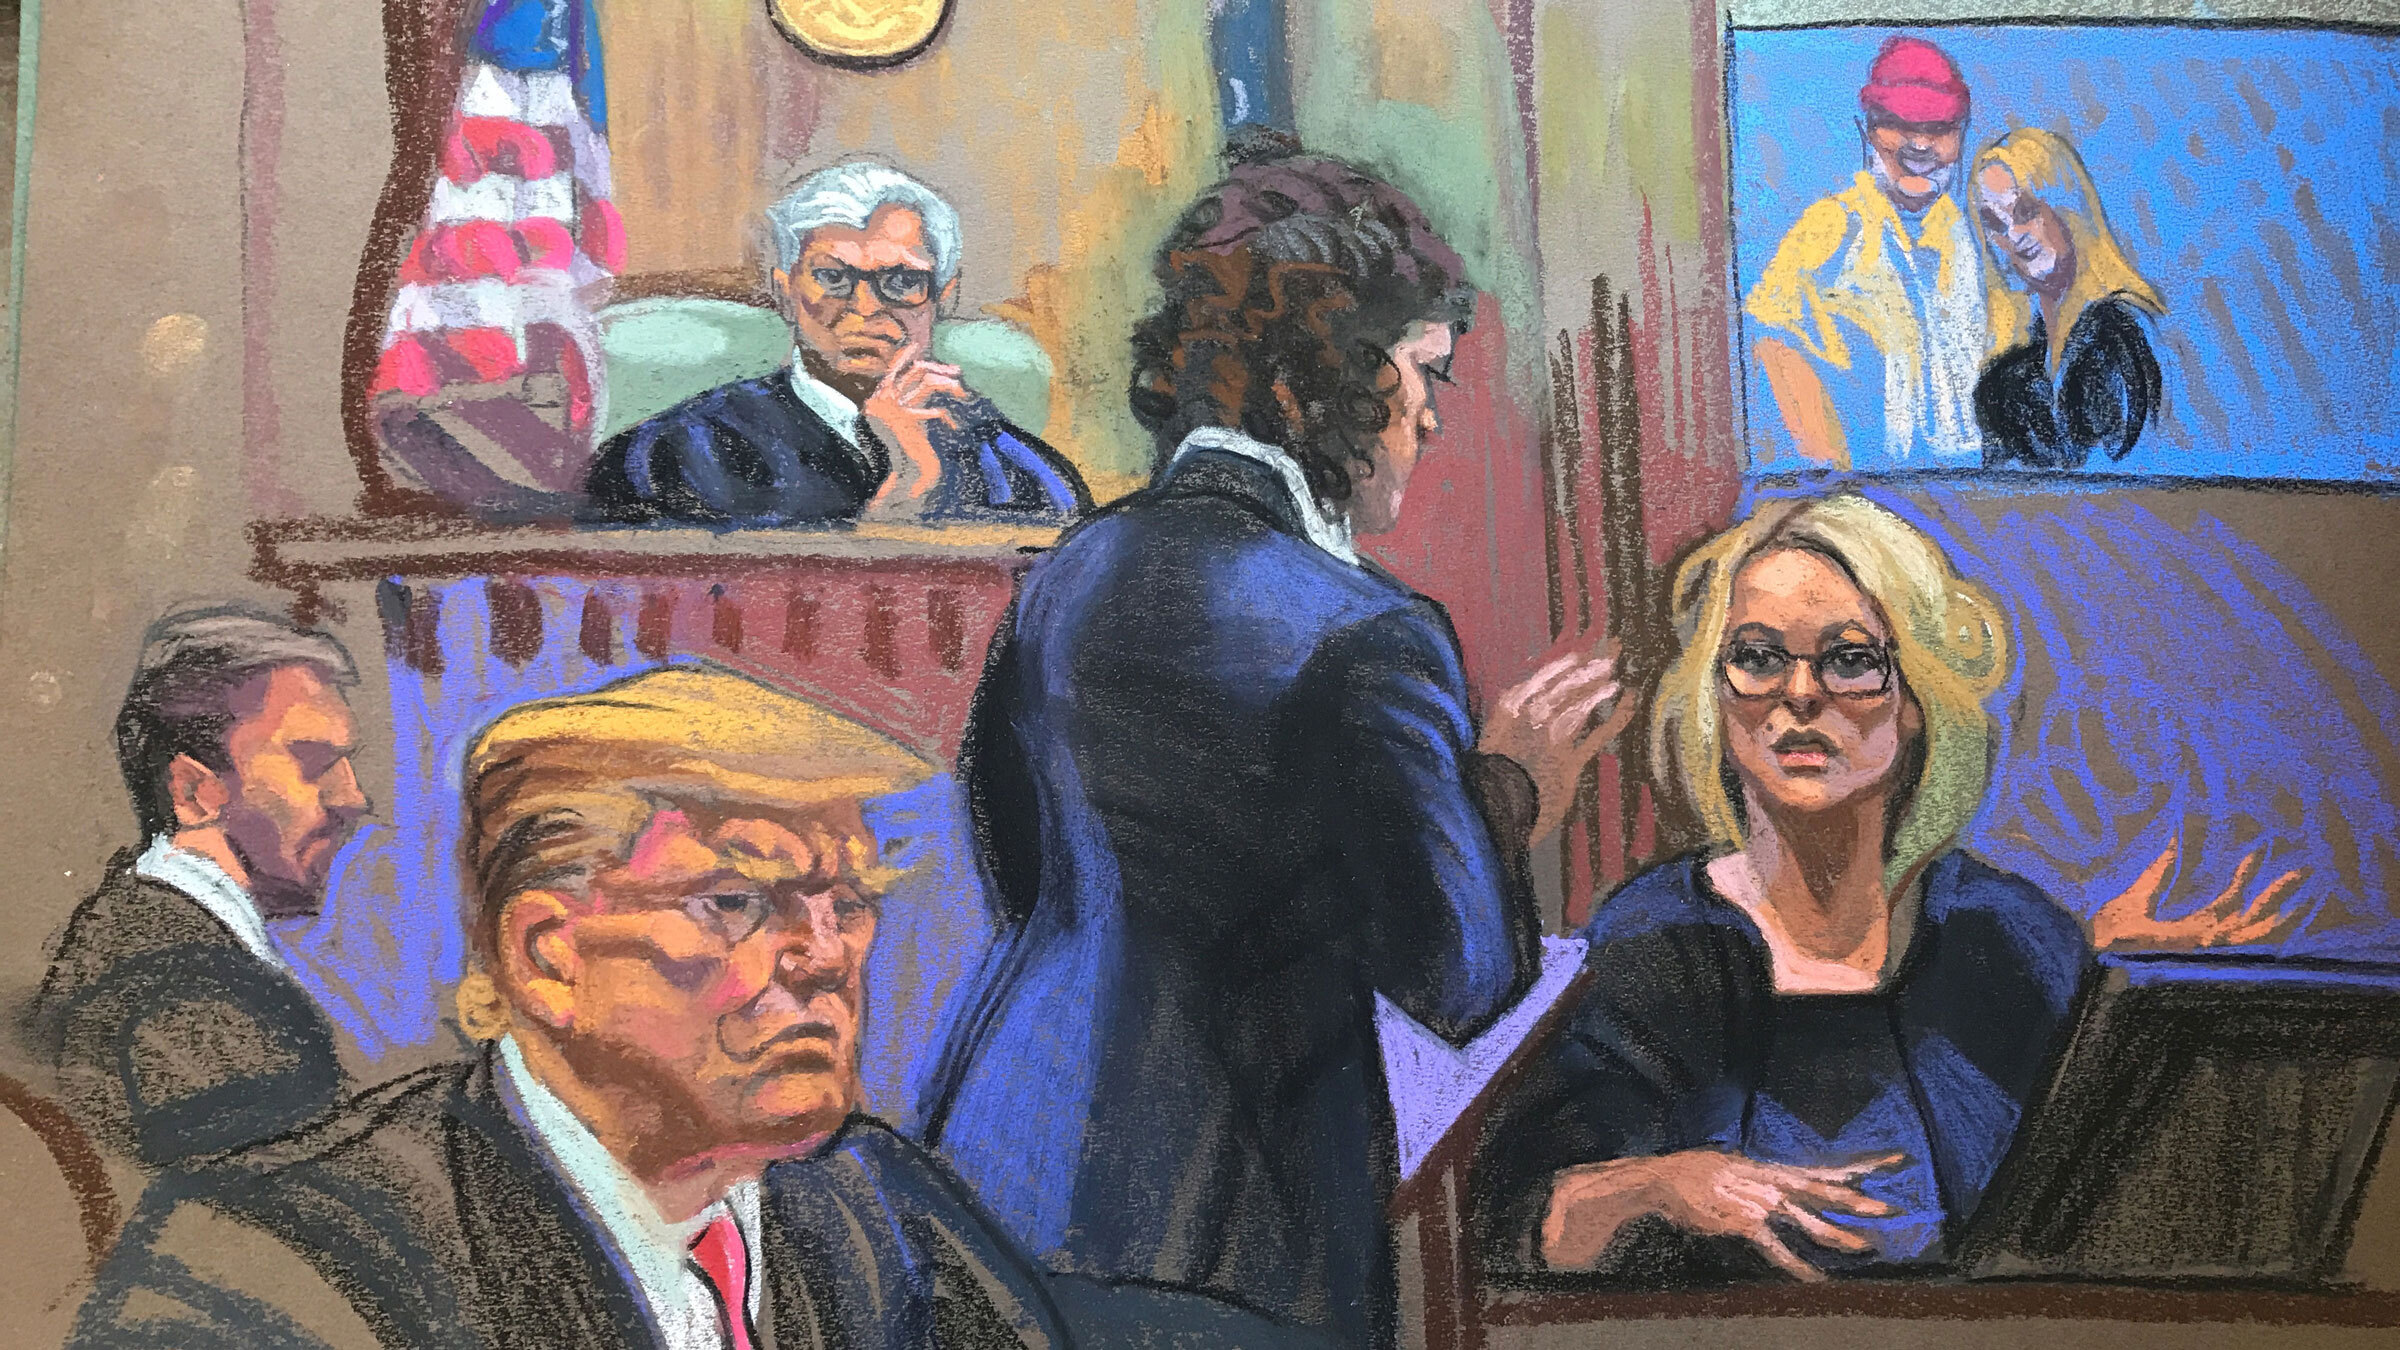 Adult film actress Stormy Daniels testifies on Tuesday.